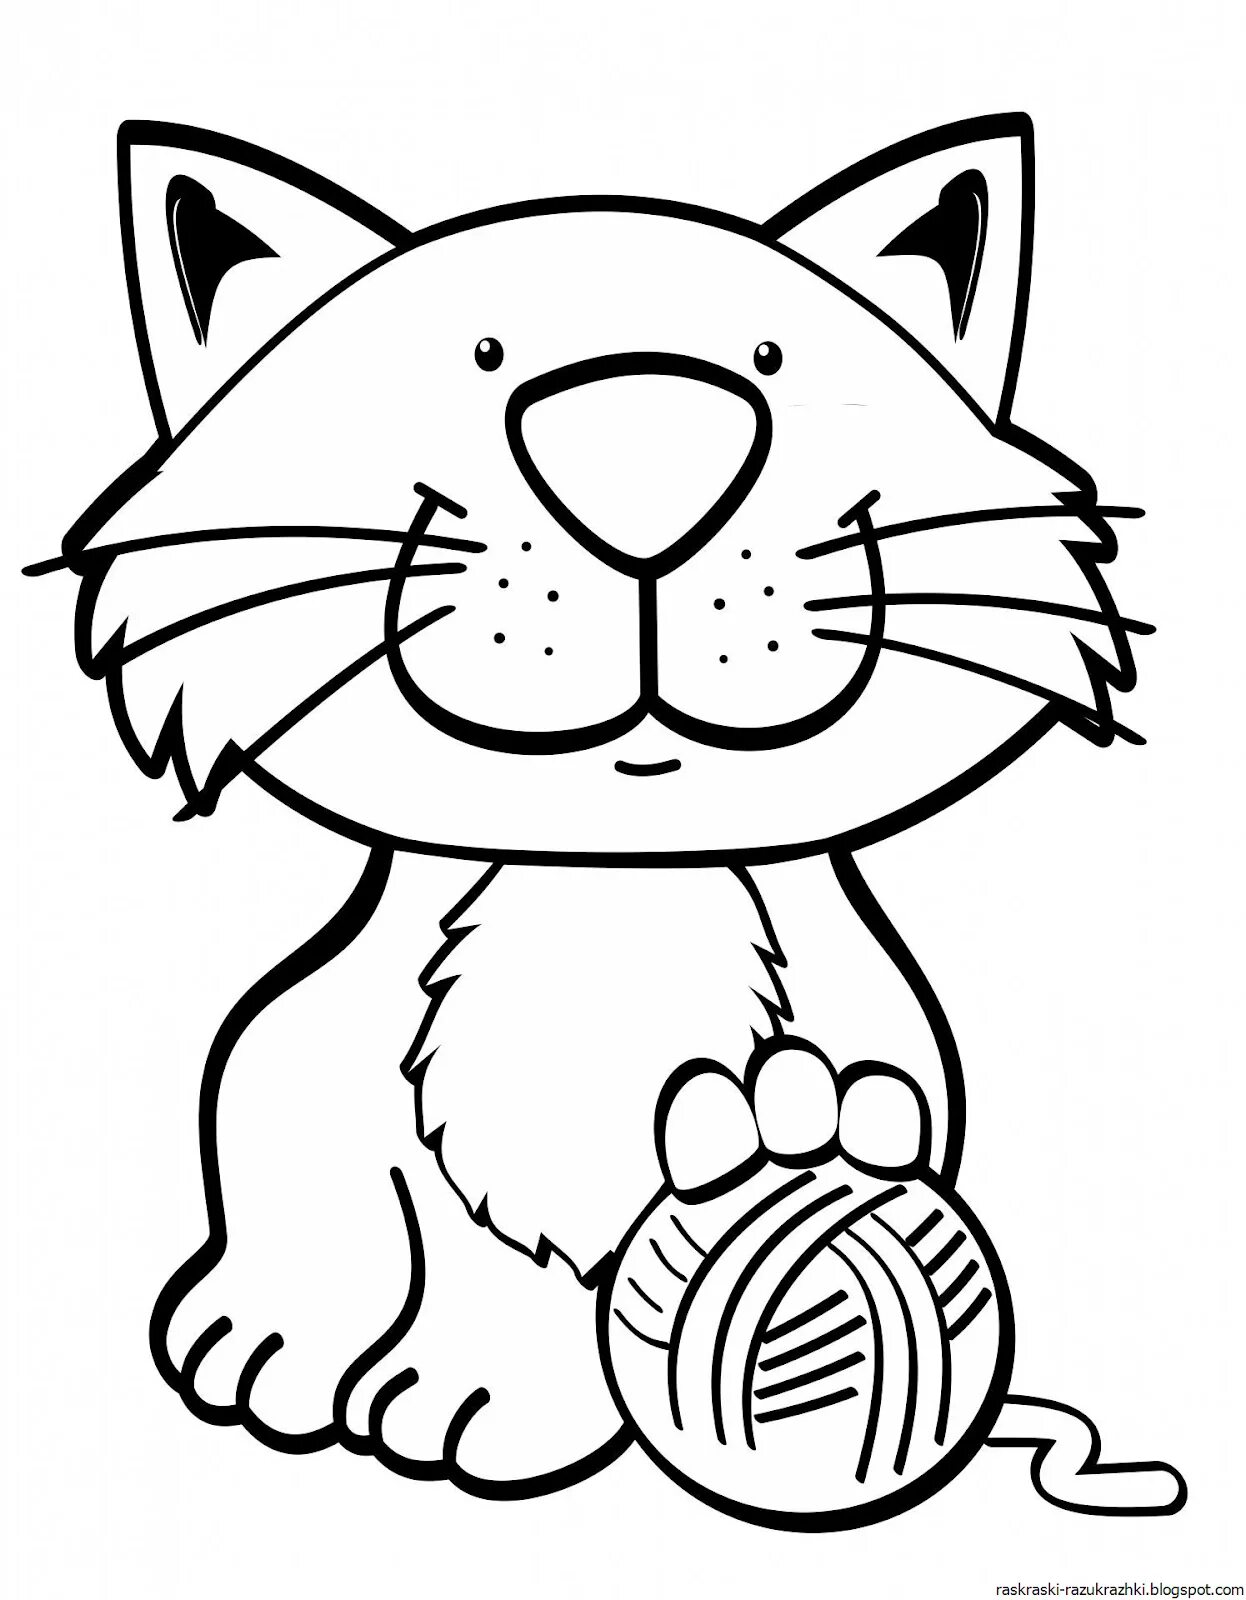 Colouring amiable cat for kids